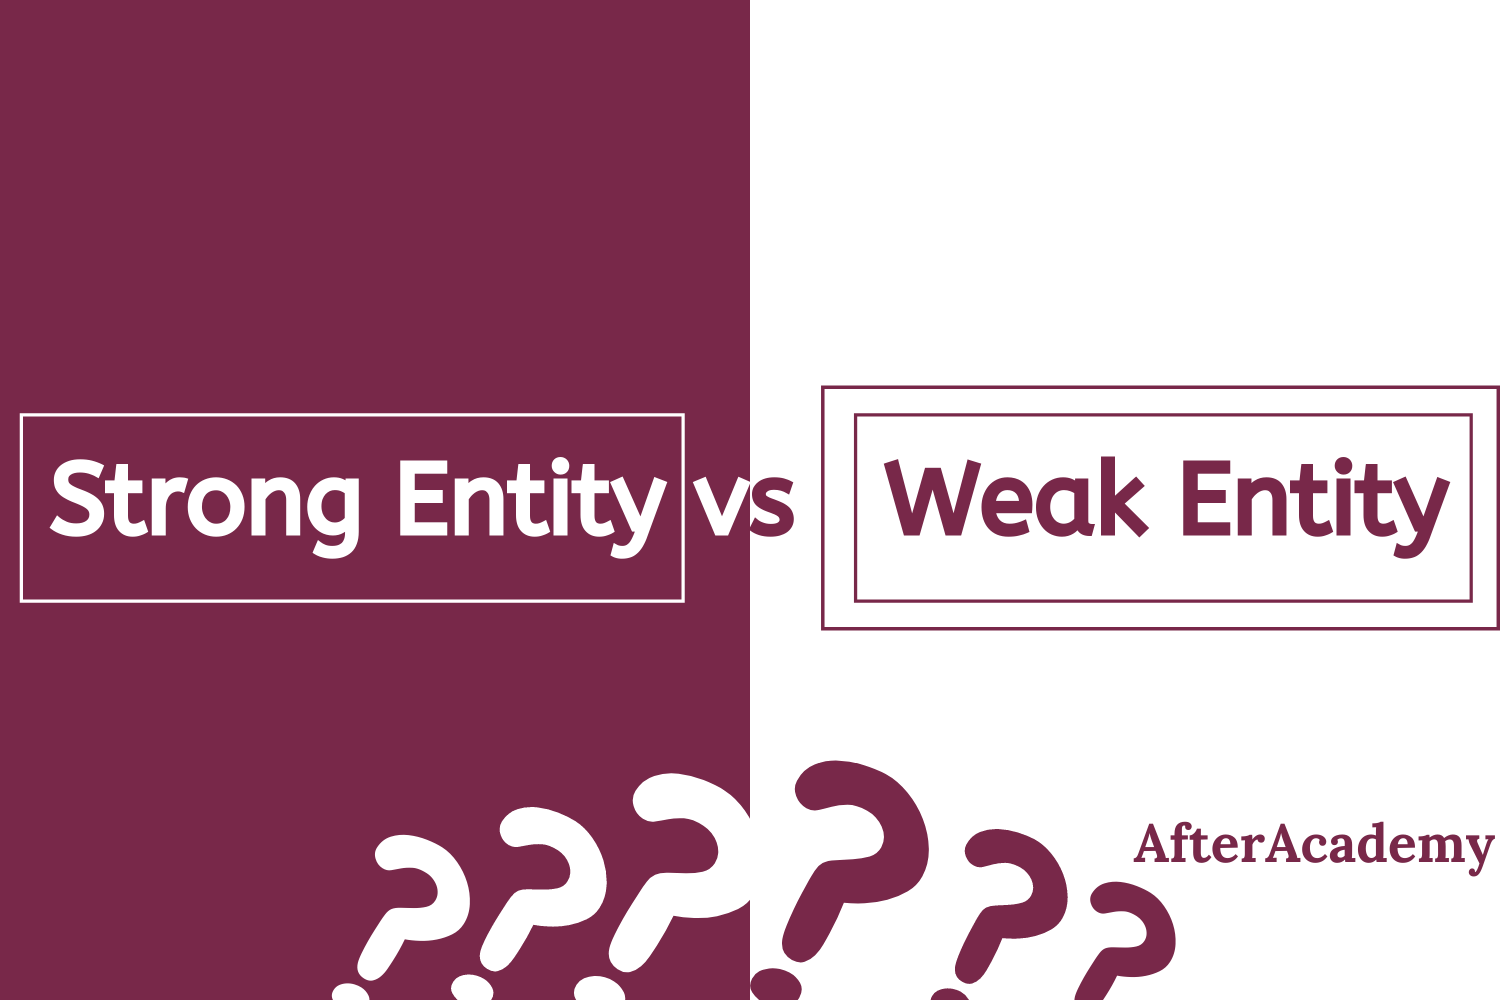 Differentiate between Weak and Strong entity